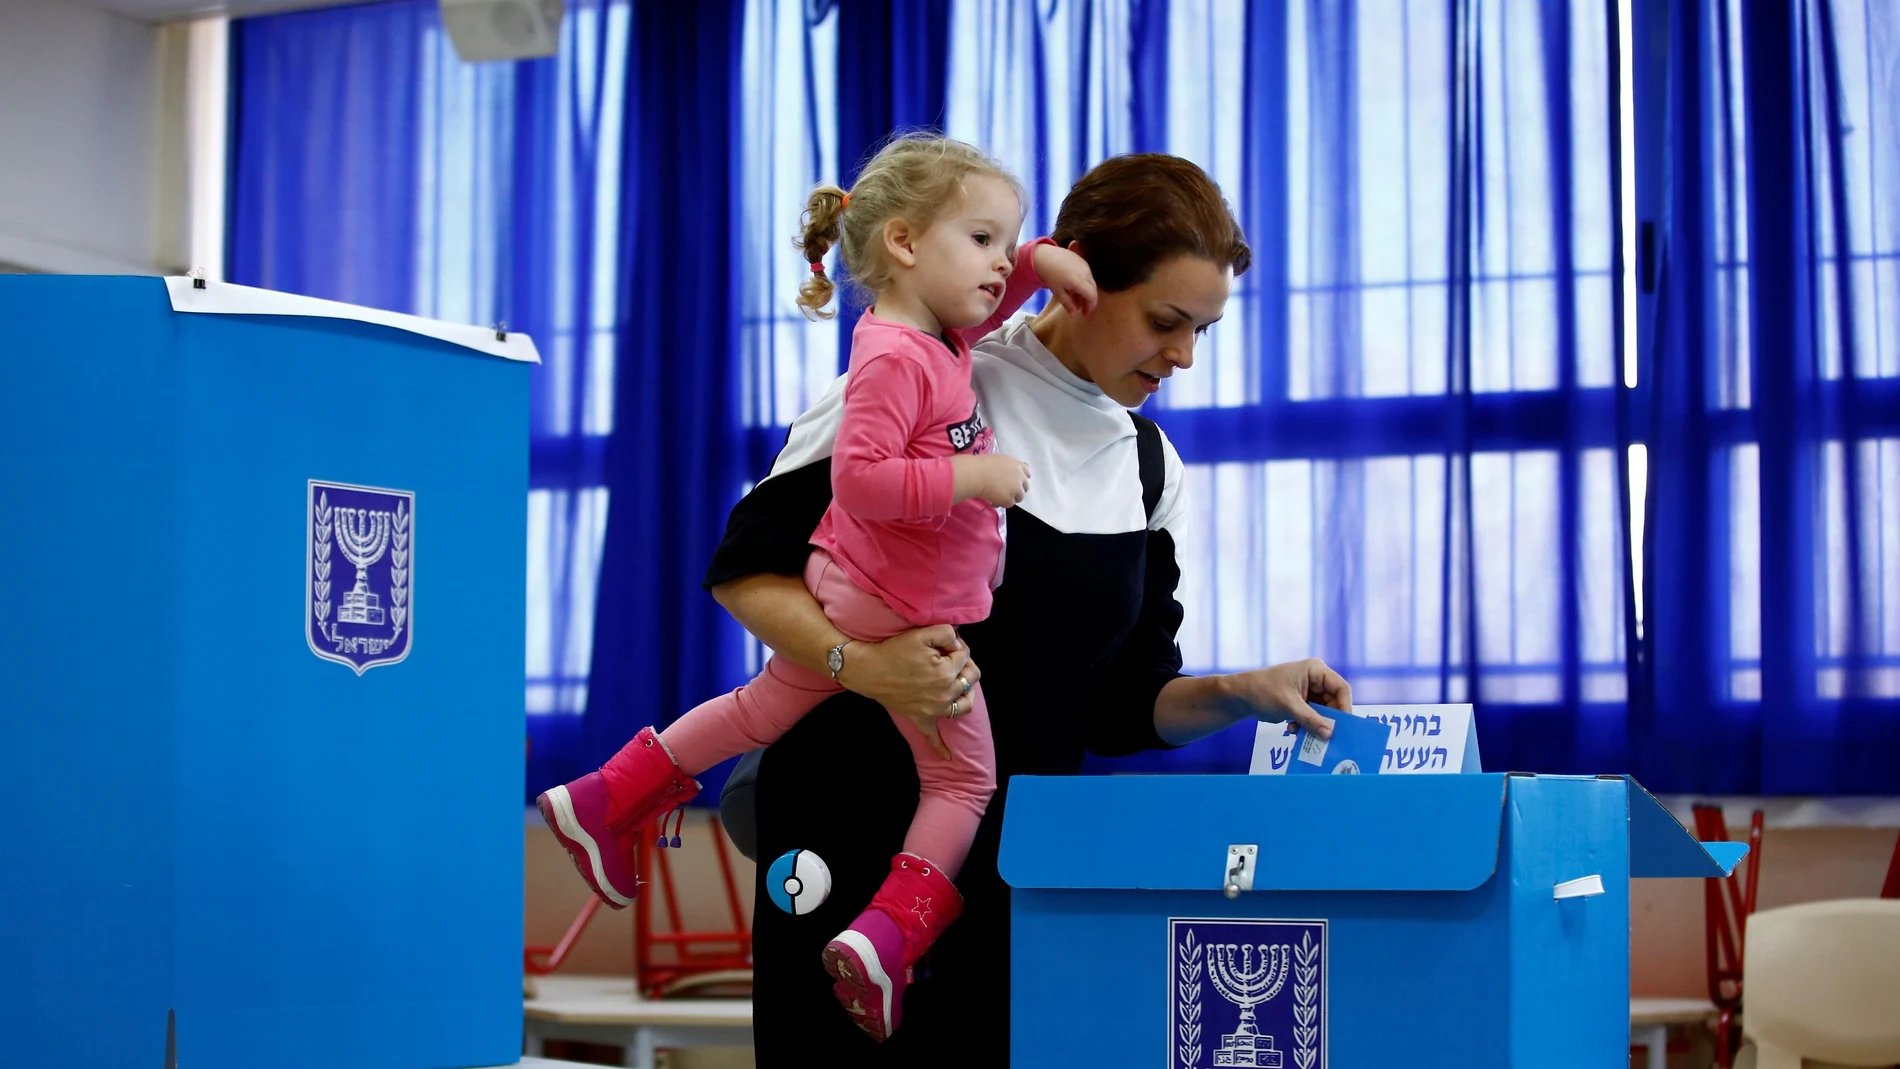 A woman casts her ballot as she votes in Israel's national election at a polling station in Tel Aviv, Israel